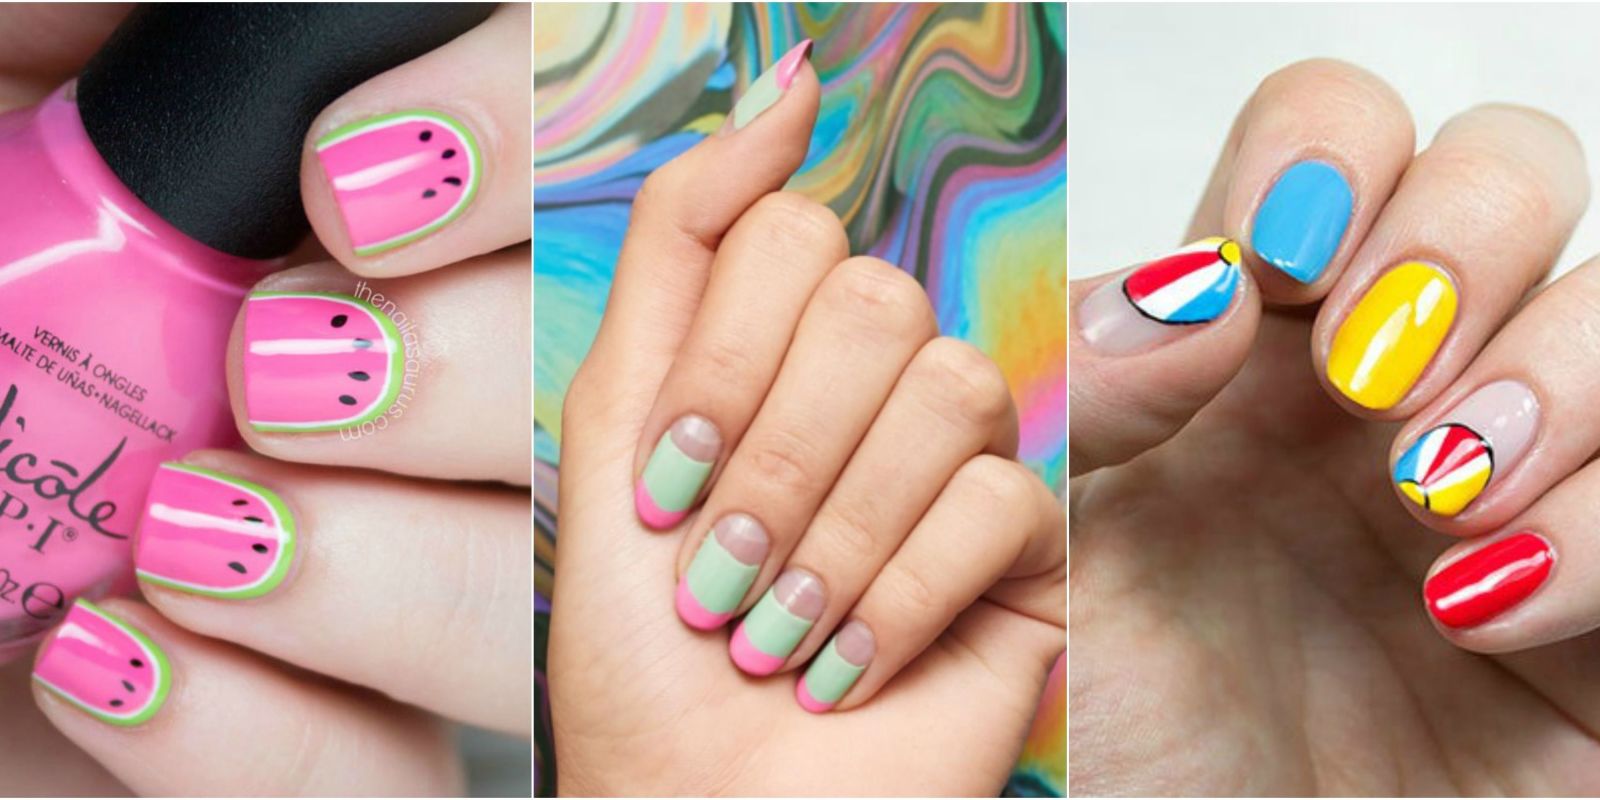 5. Colorful Gel Nail Art Ideas - wide 3